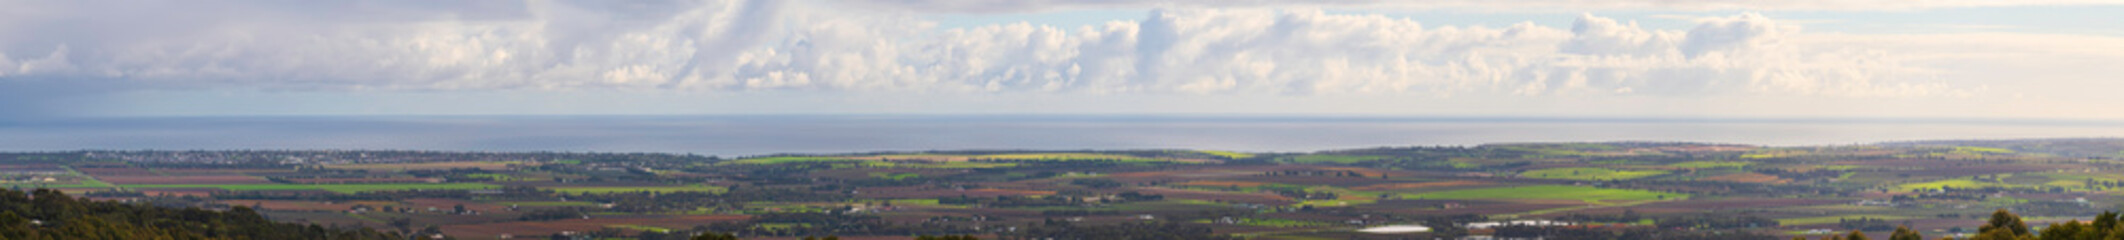 Spectacular panoramic view of McLaren Vale from Willunga Hill Lookout, South Australia